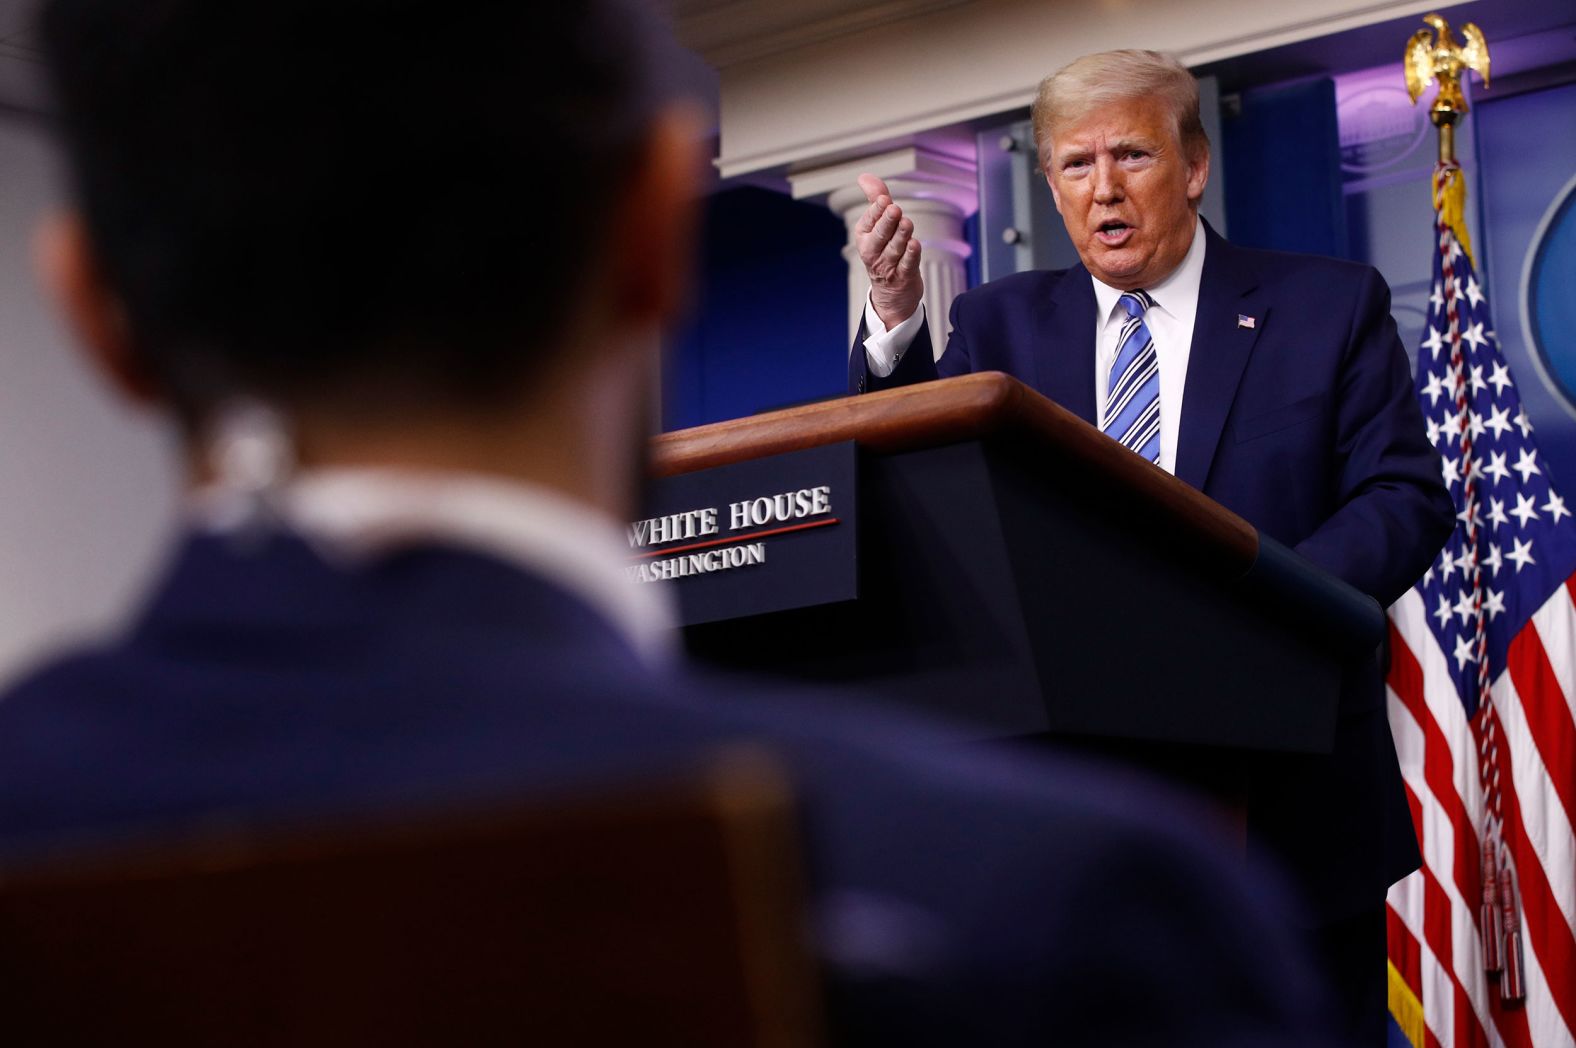 Trump responds to a question from CNN's Jeremy Diamond during the White House coronavirus briefing on April 19. When pressed by Diamond as to why he was taking time during briefing to<a href="index.php?page=&url=https%3A%2F%2Fwww.cnn.com%2Fworld%2Flive-news%2Fcoronavirus-pandemic-04-19-20-intl%2Fh_518ef7f7b57941c3ce031ad63ff129ac" target="_blank"> discuss praise he has received</a> while millions of Americans were unemployed and tens of thousands had died, Trump said he was "standing up for the men and women who have done such an incredible job," not for himself. "It's not about me. Nothing is about me," he said. The clips Trump played at the briefing praised himself and not health-care workers.